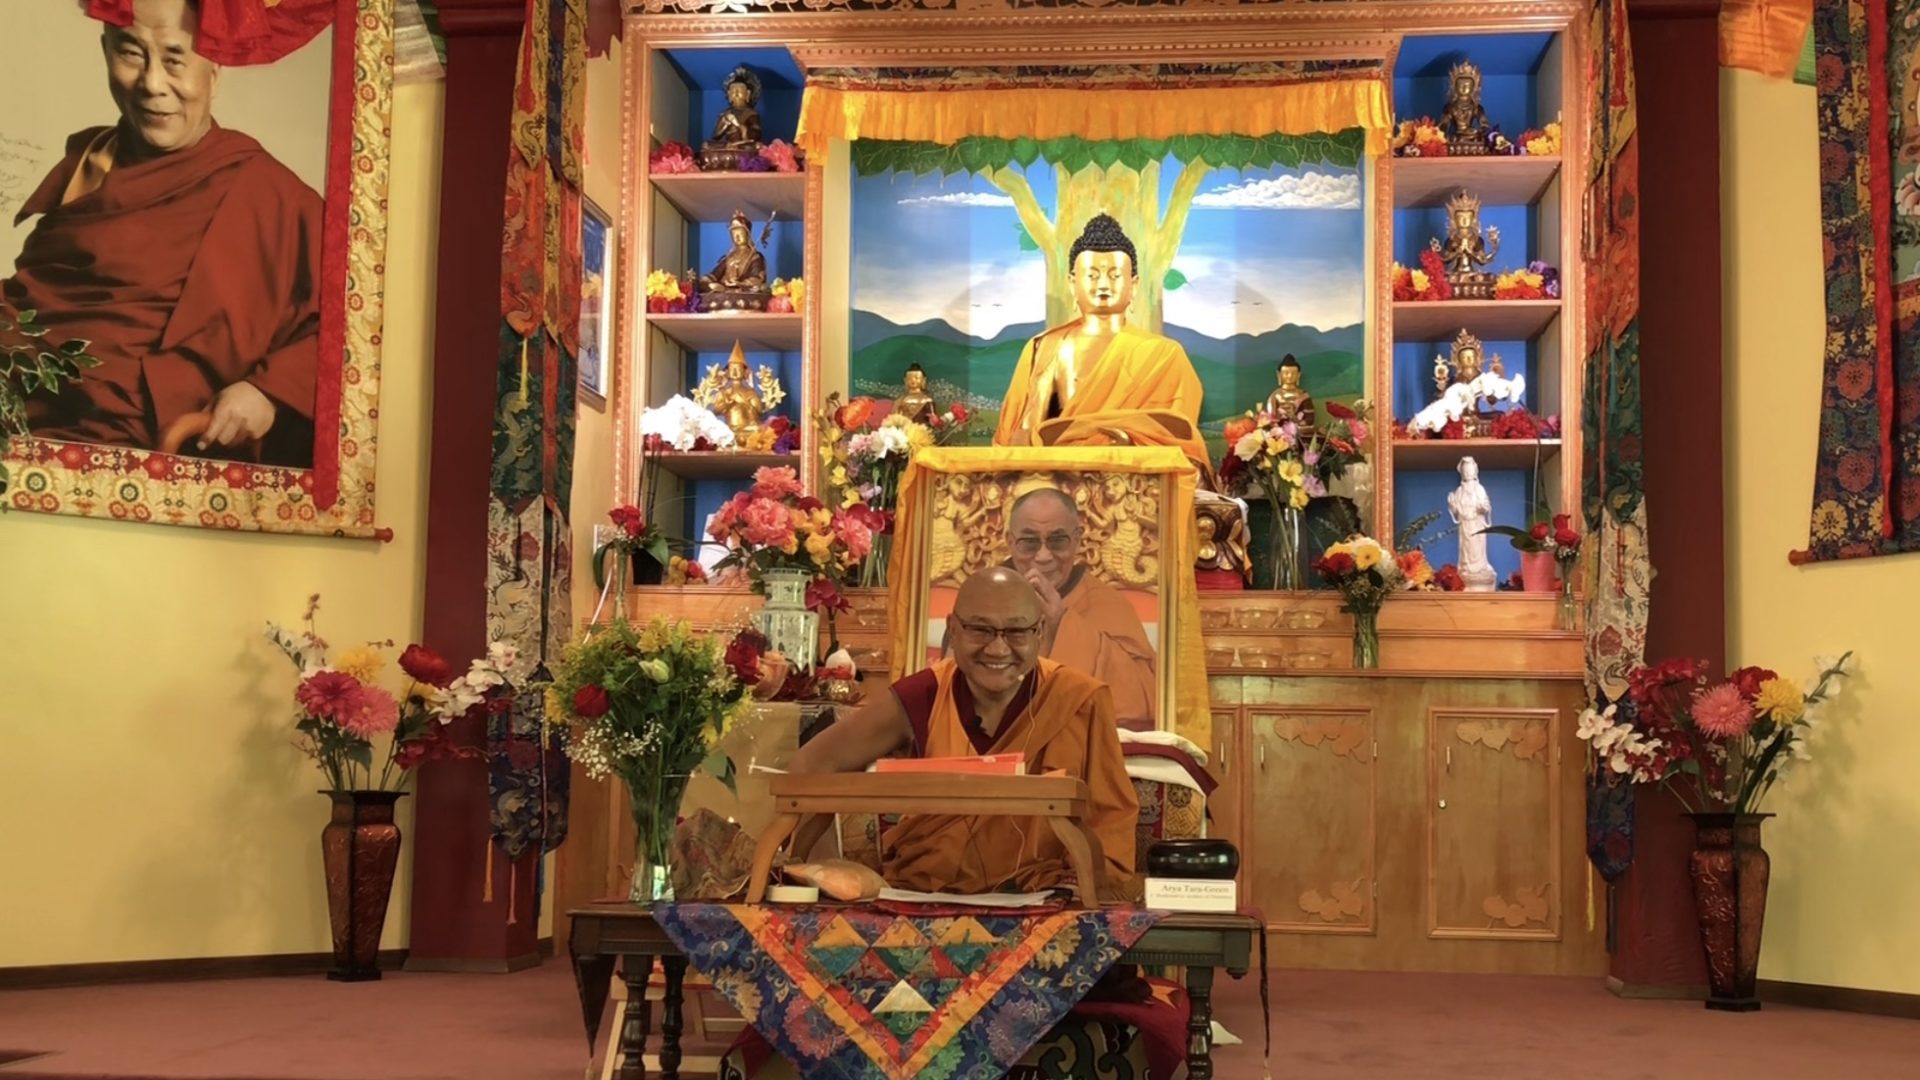 Geshe Phelgye teaching at the Buddhist Institute of Universal Compassion temple